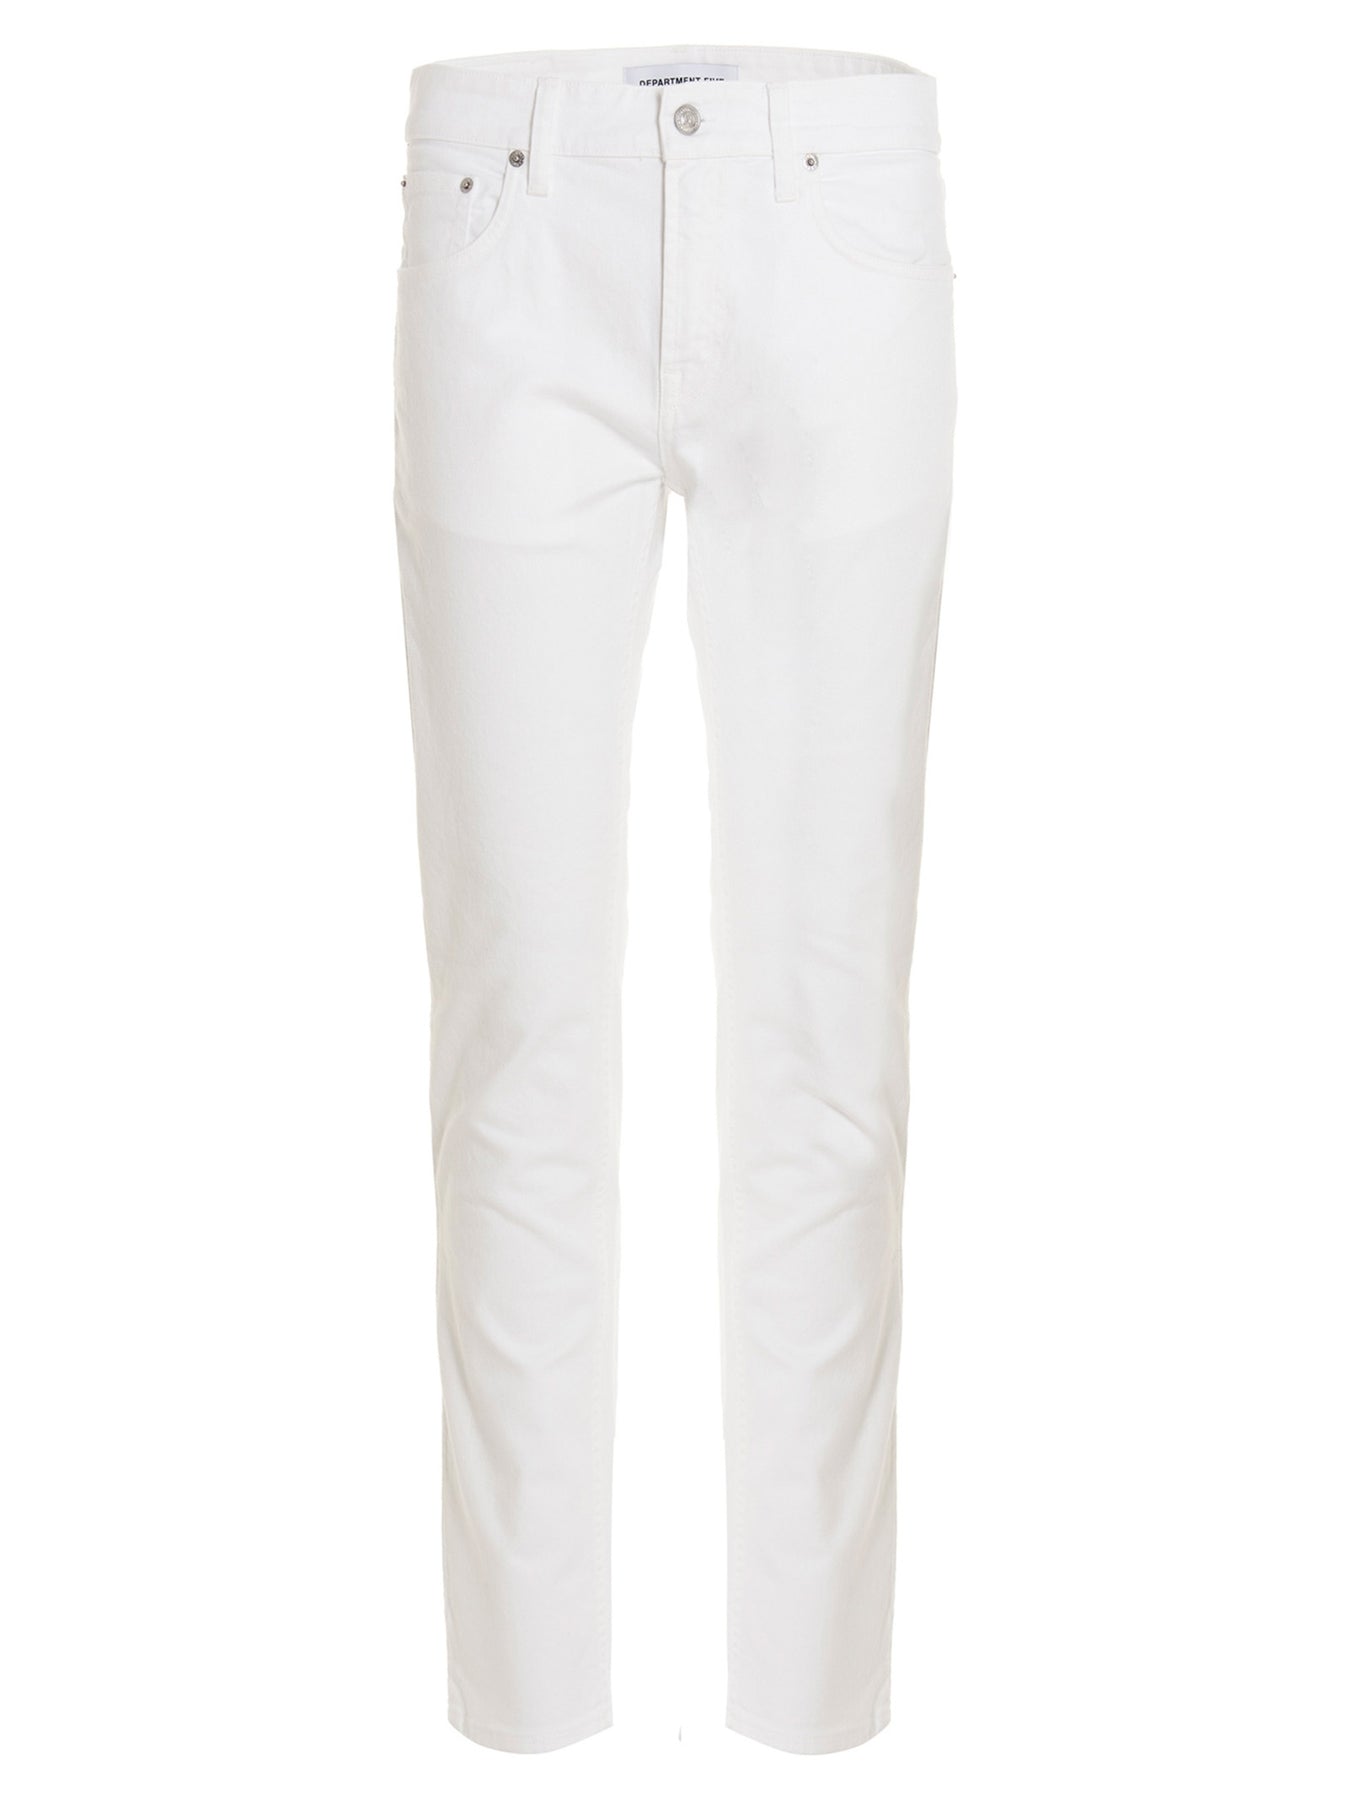 Department 5 Skeith Jeans White